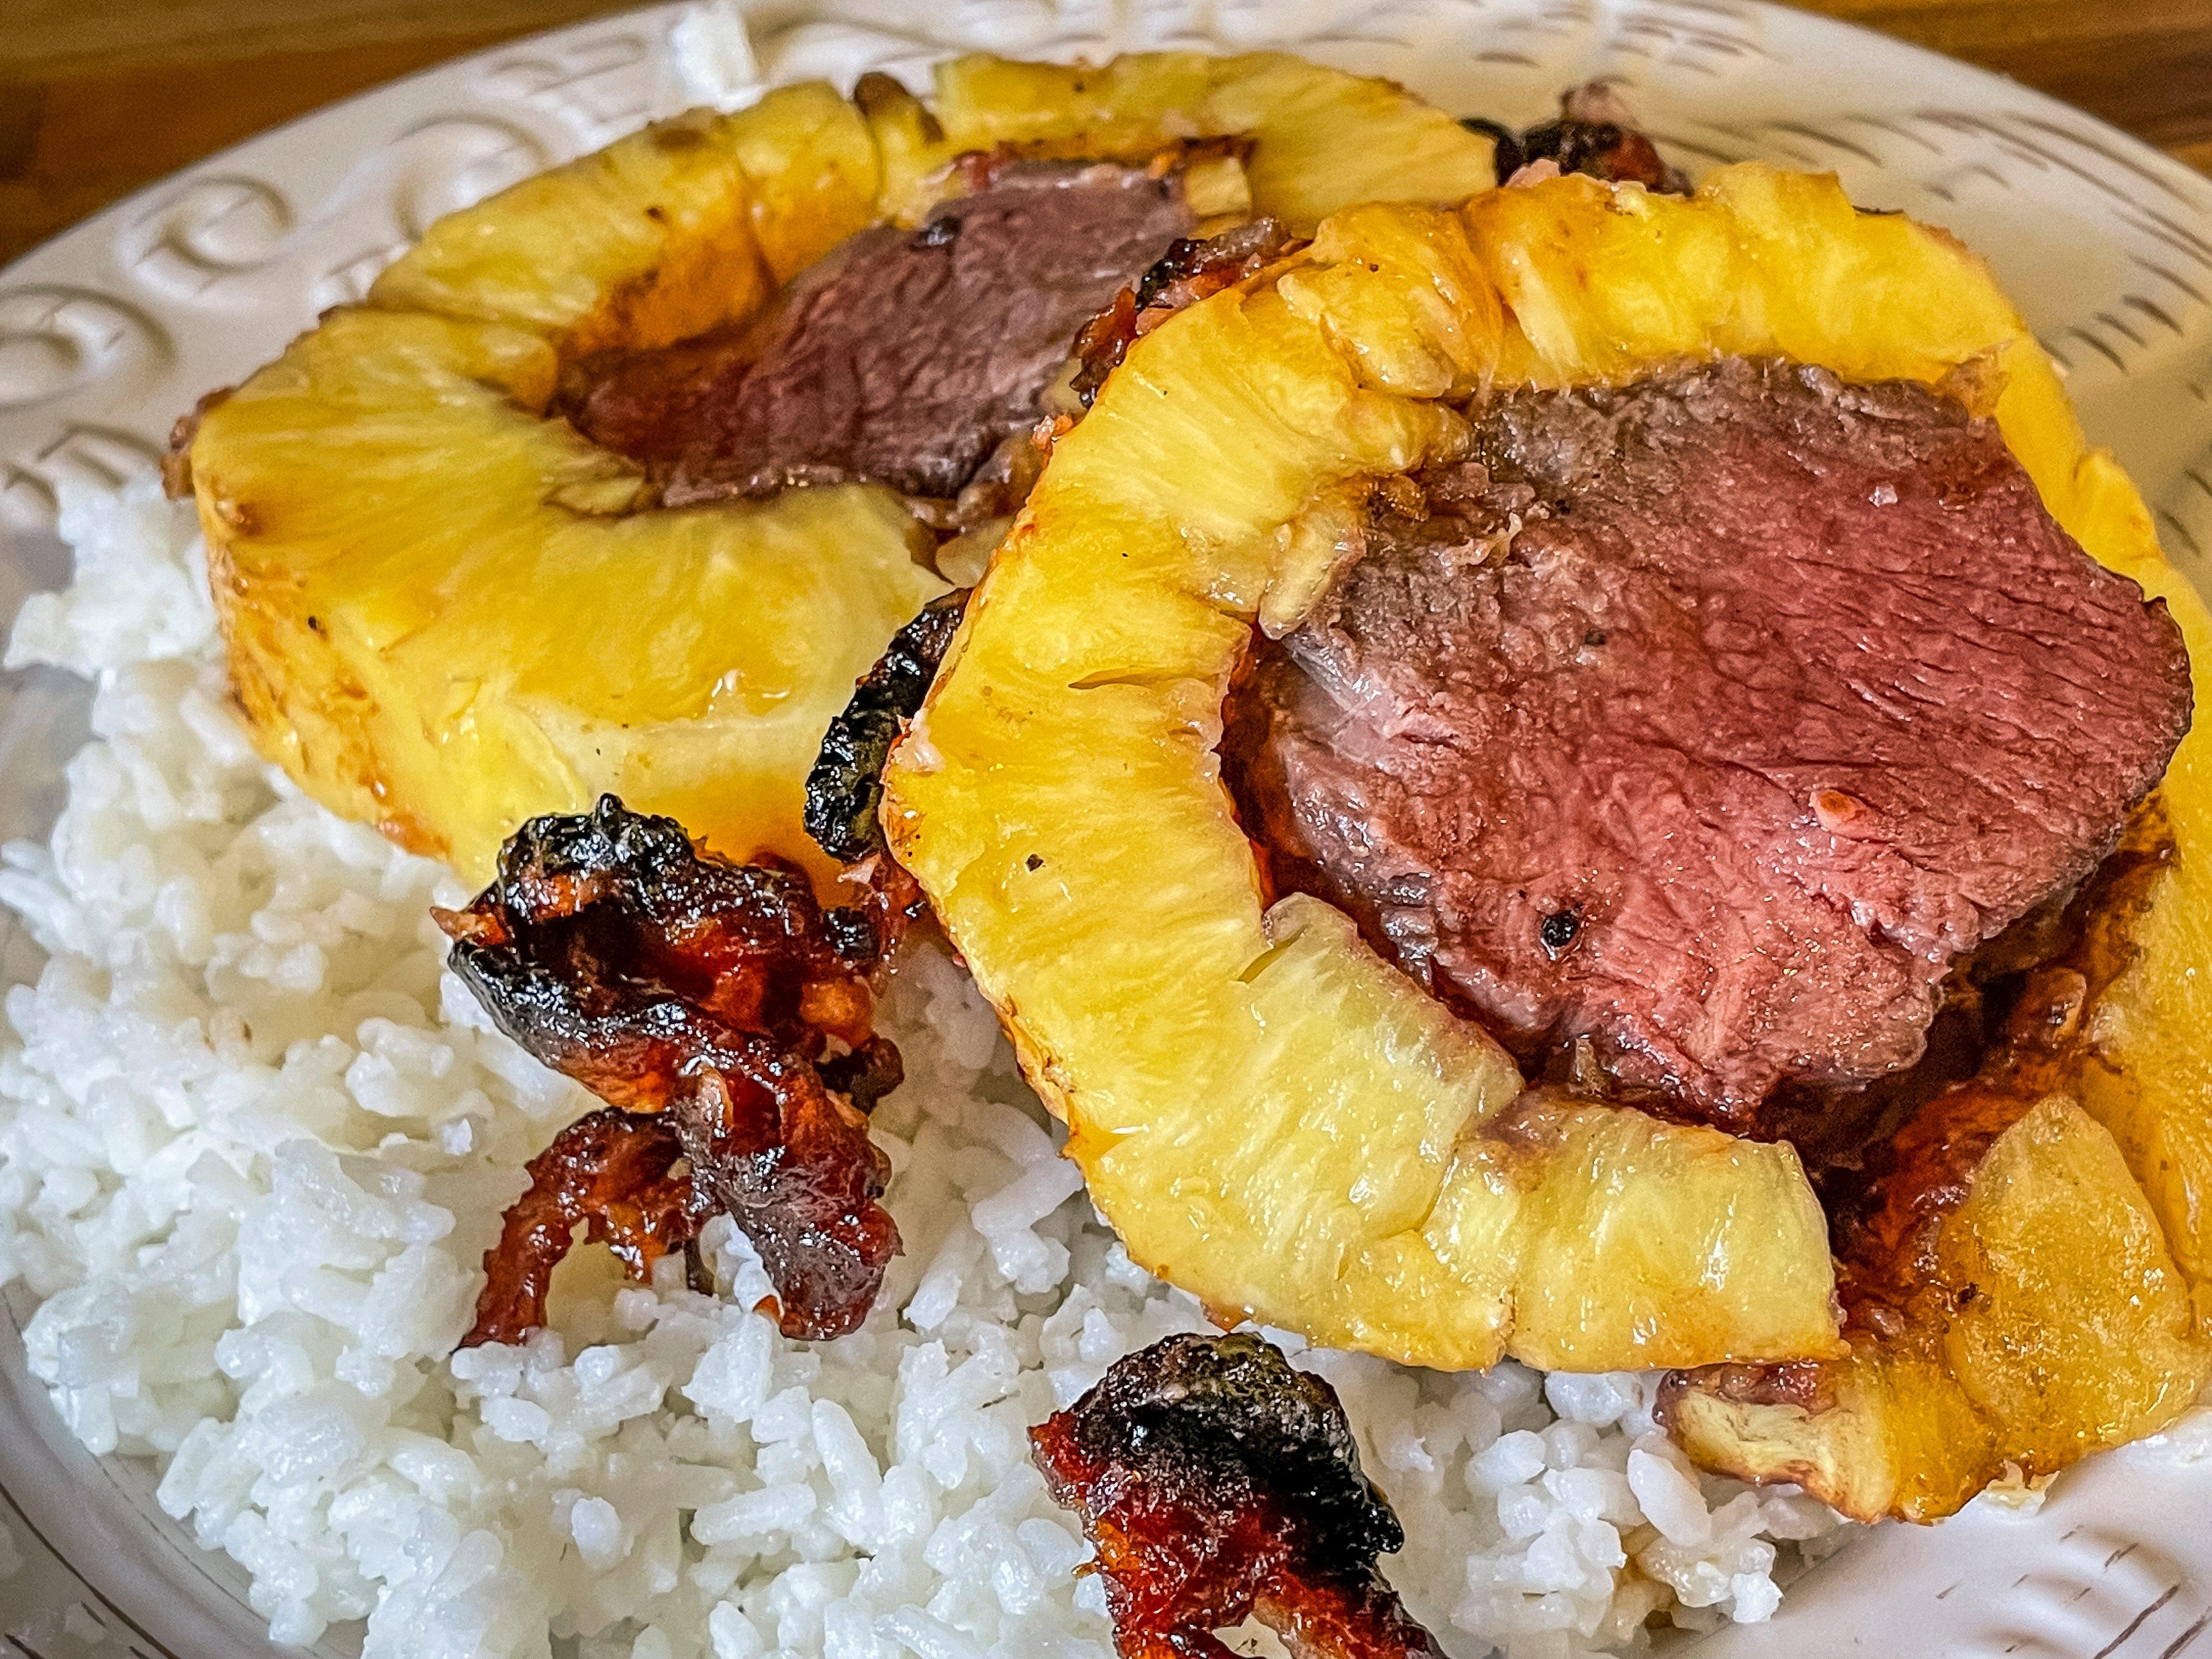 Serve the backstrap and pineapple over rice for a full meal.